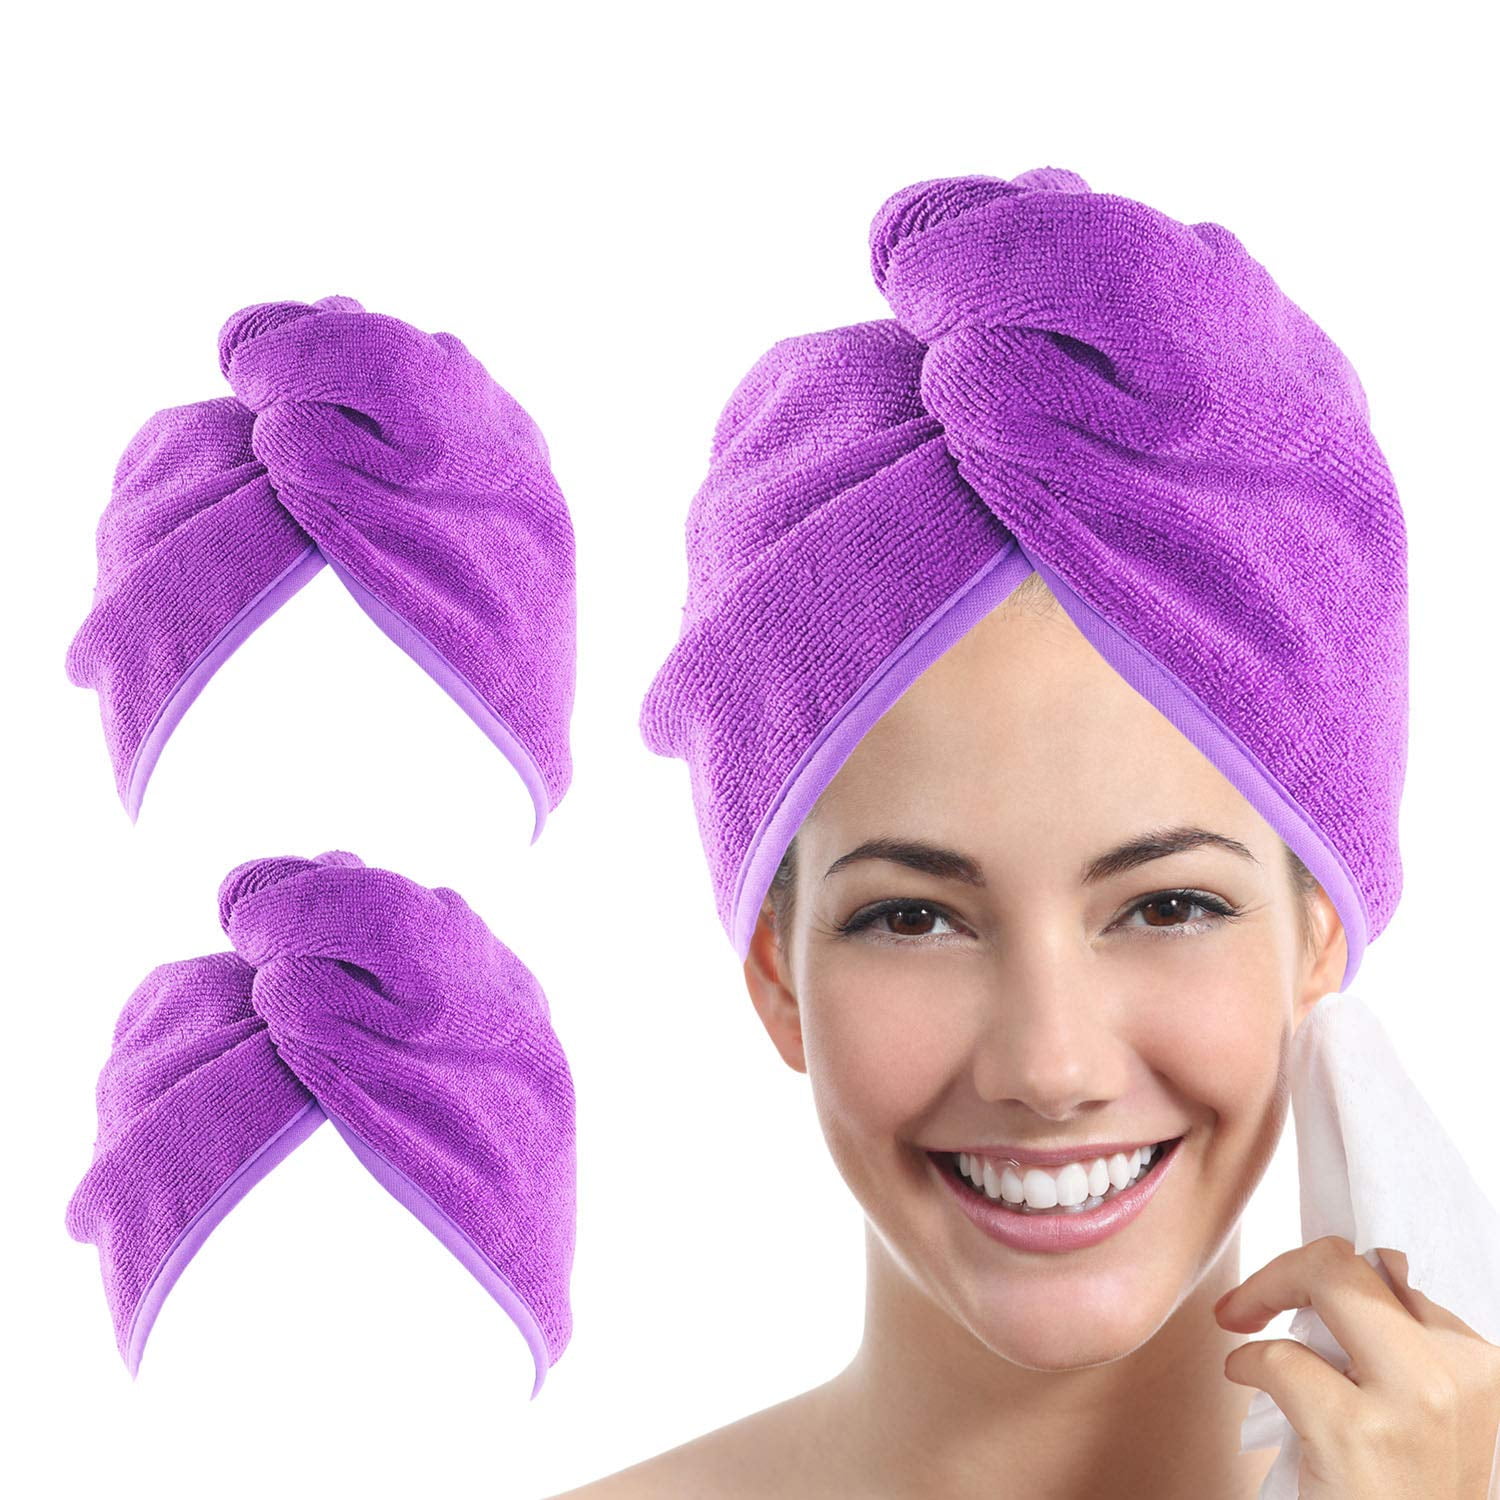 Amazon.com : YFONG 3 Pack Microfiber Hair Towel with Button, Super  Absorbent Fast Drying Hair Wraps for Curly Hair, Anti Frizz Microfiber Towel  for Women : Beauty & Personal Care